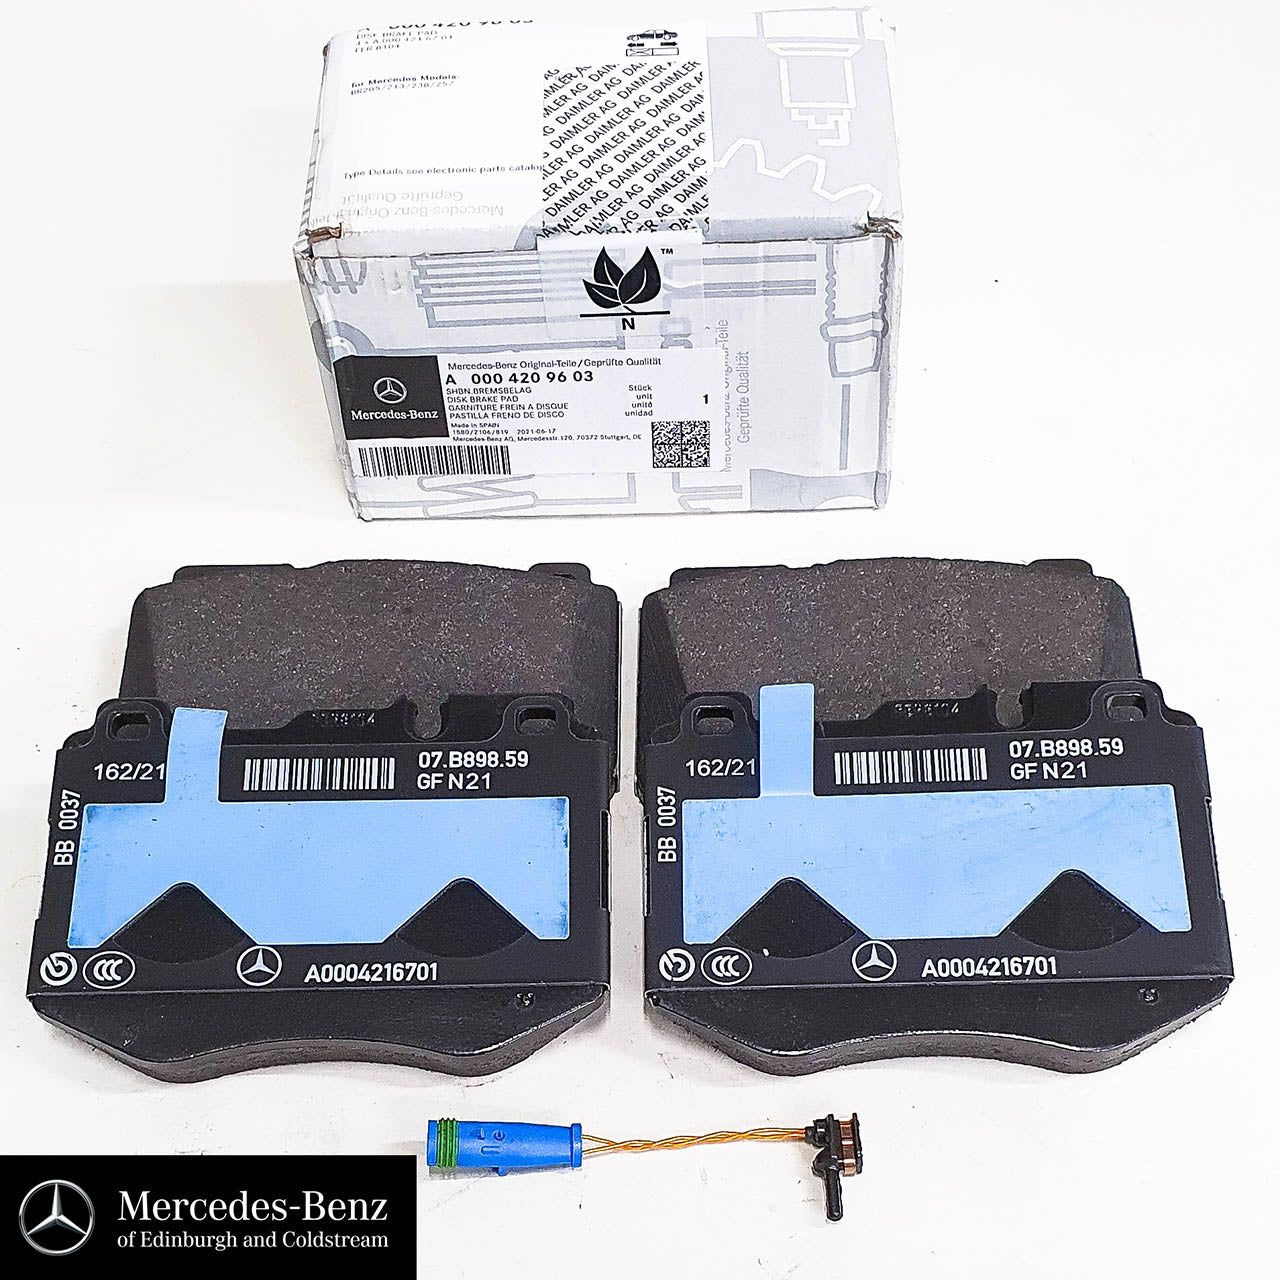 Genuine Mercedes-Benz Front Brake Pads C Class, E Class with AMG sport brake package